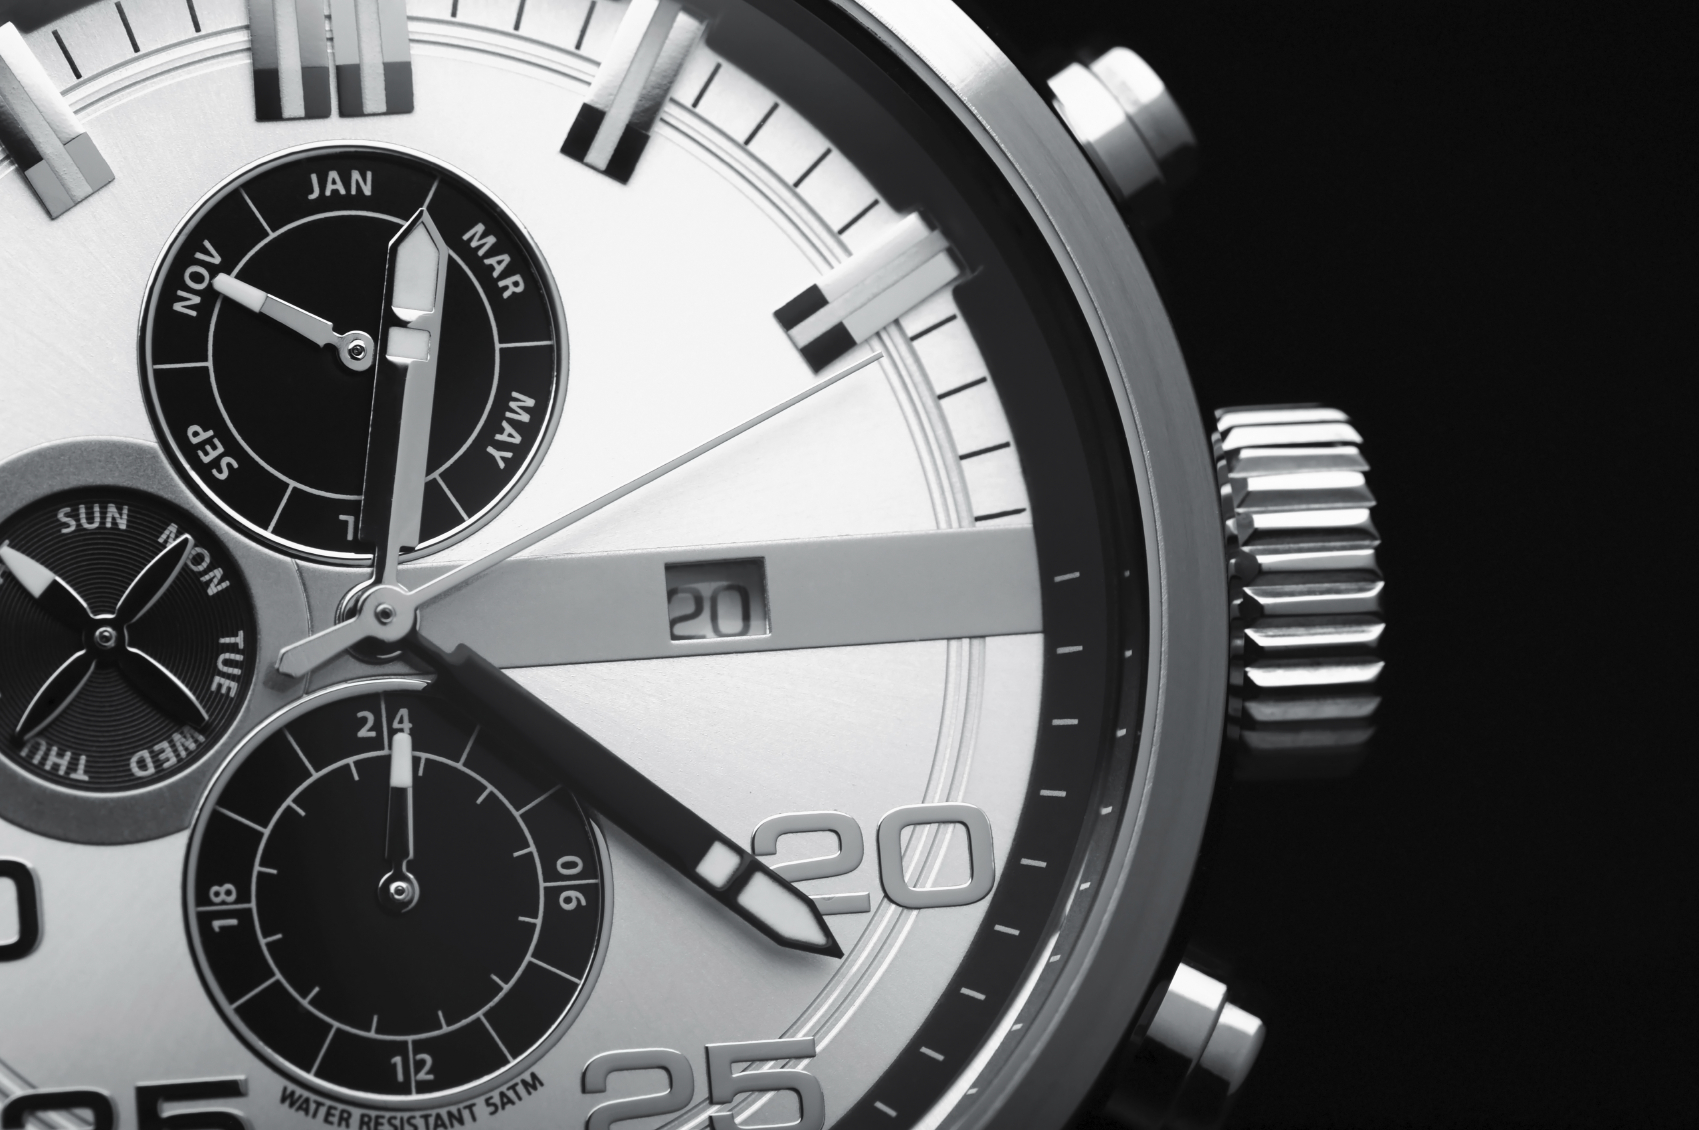 Fairfax&#39;s 0 Launches With Ad Partners Tag Heuer And Louis Vuitton - B&T